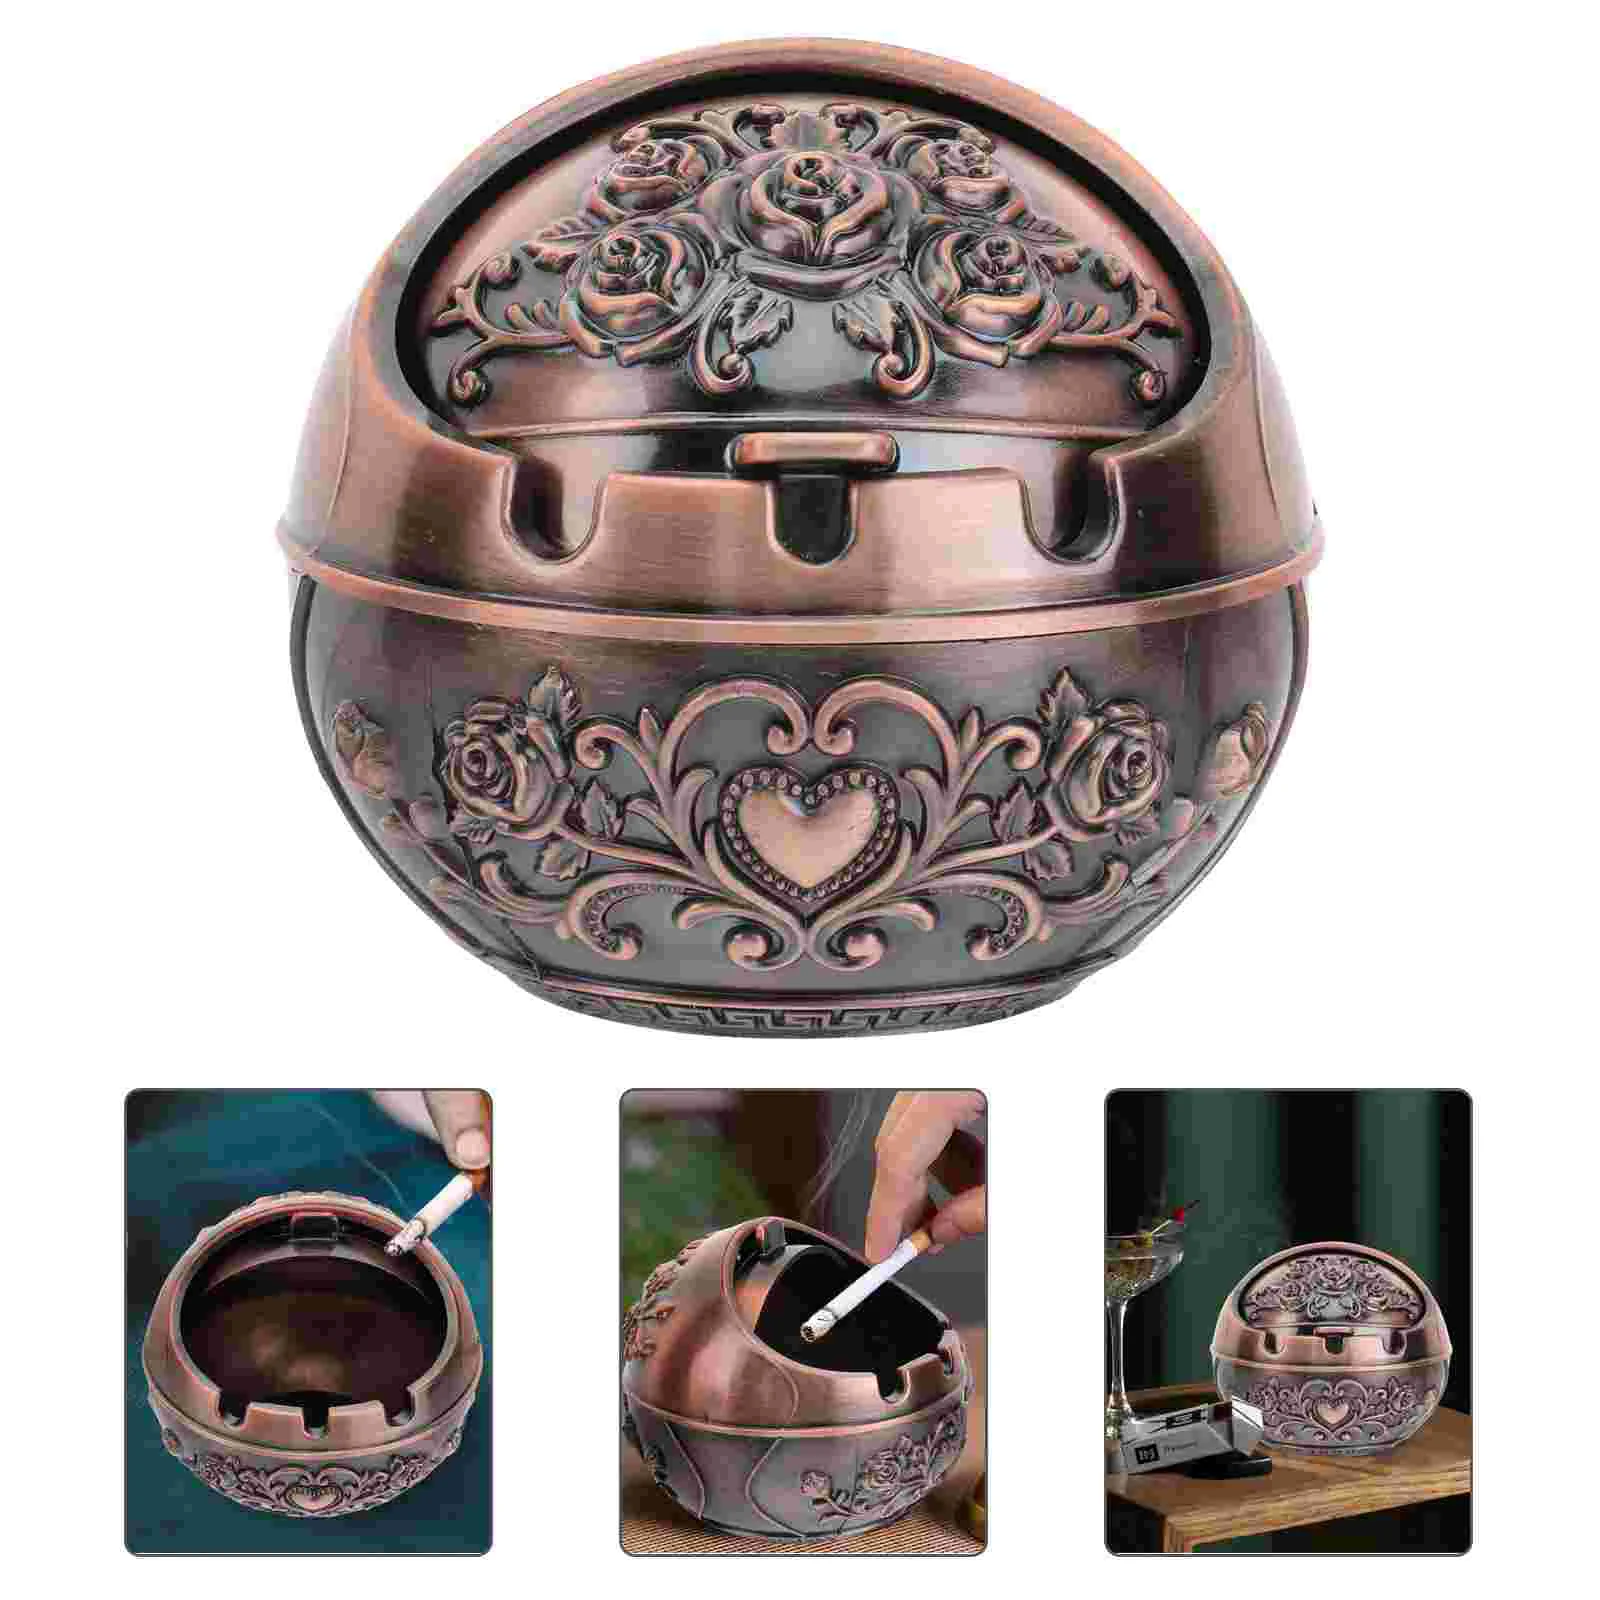 

Ashtray Ash Outdoor Ashtrays Holder Tray Lid Windproof Decorative Funny Stand Smokeless Indoor Metal Iron Vintage Fireproof Cool